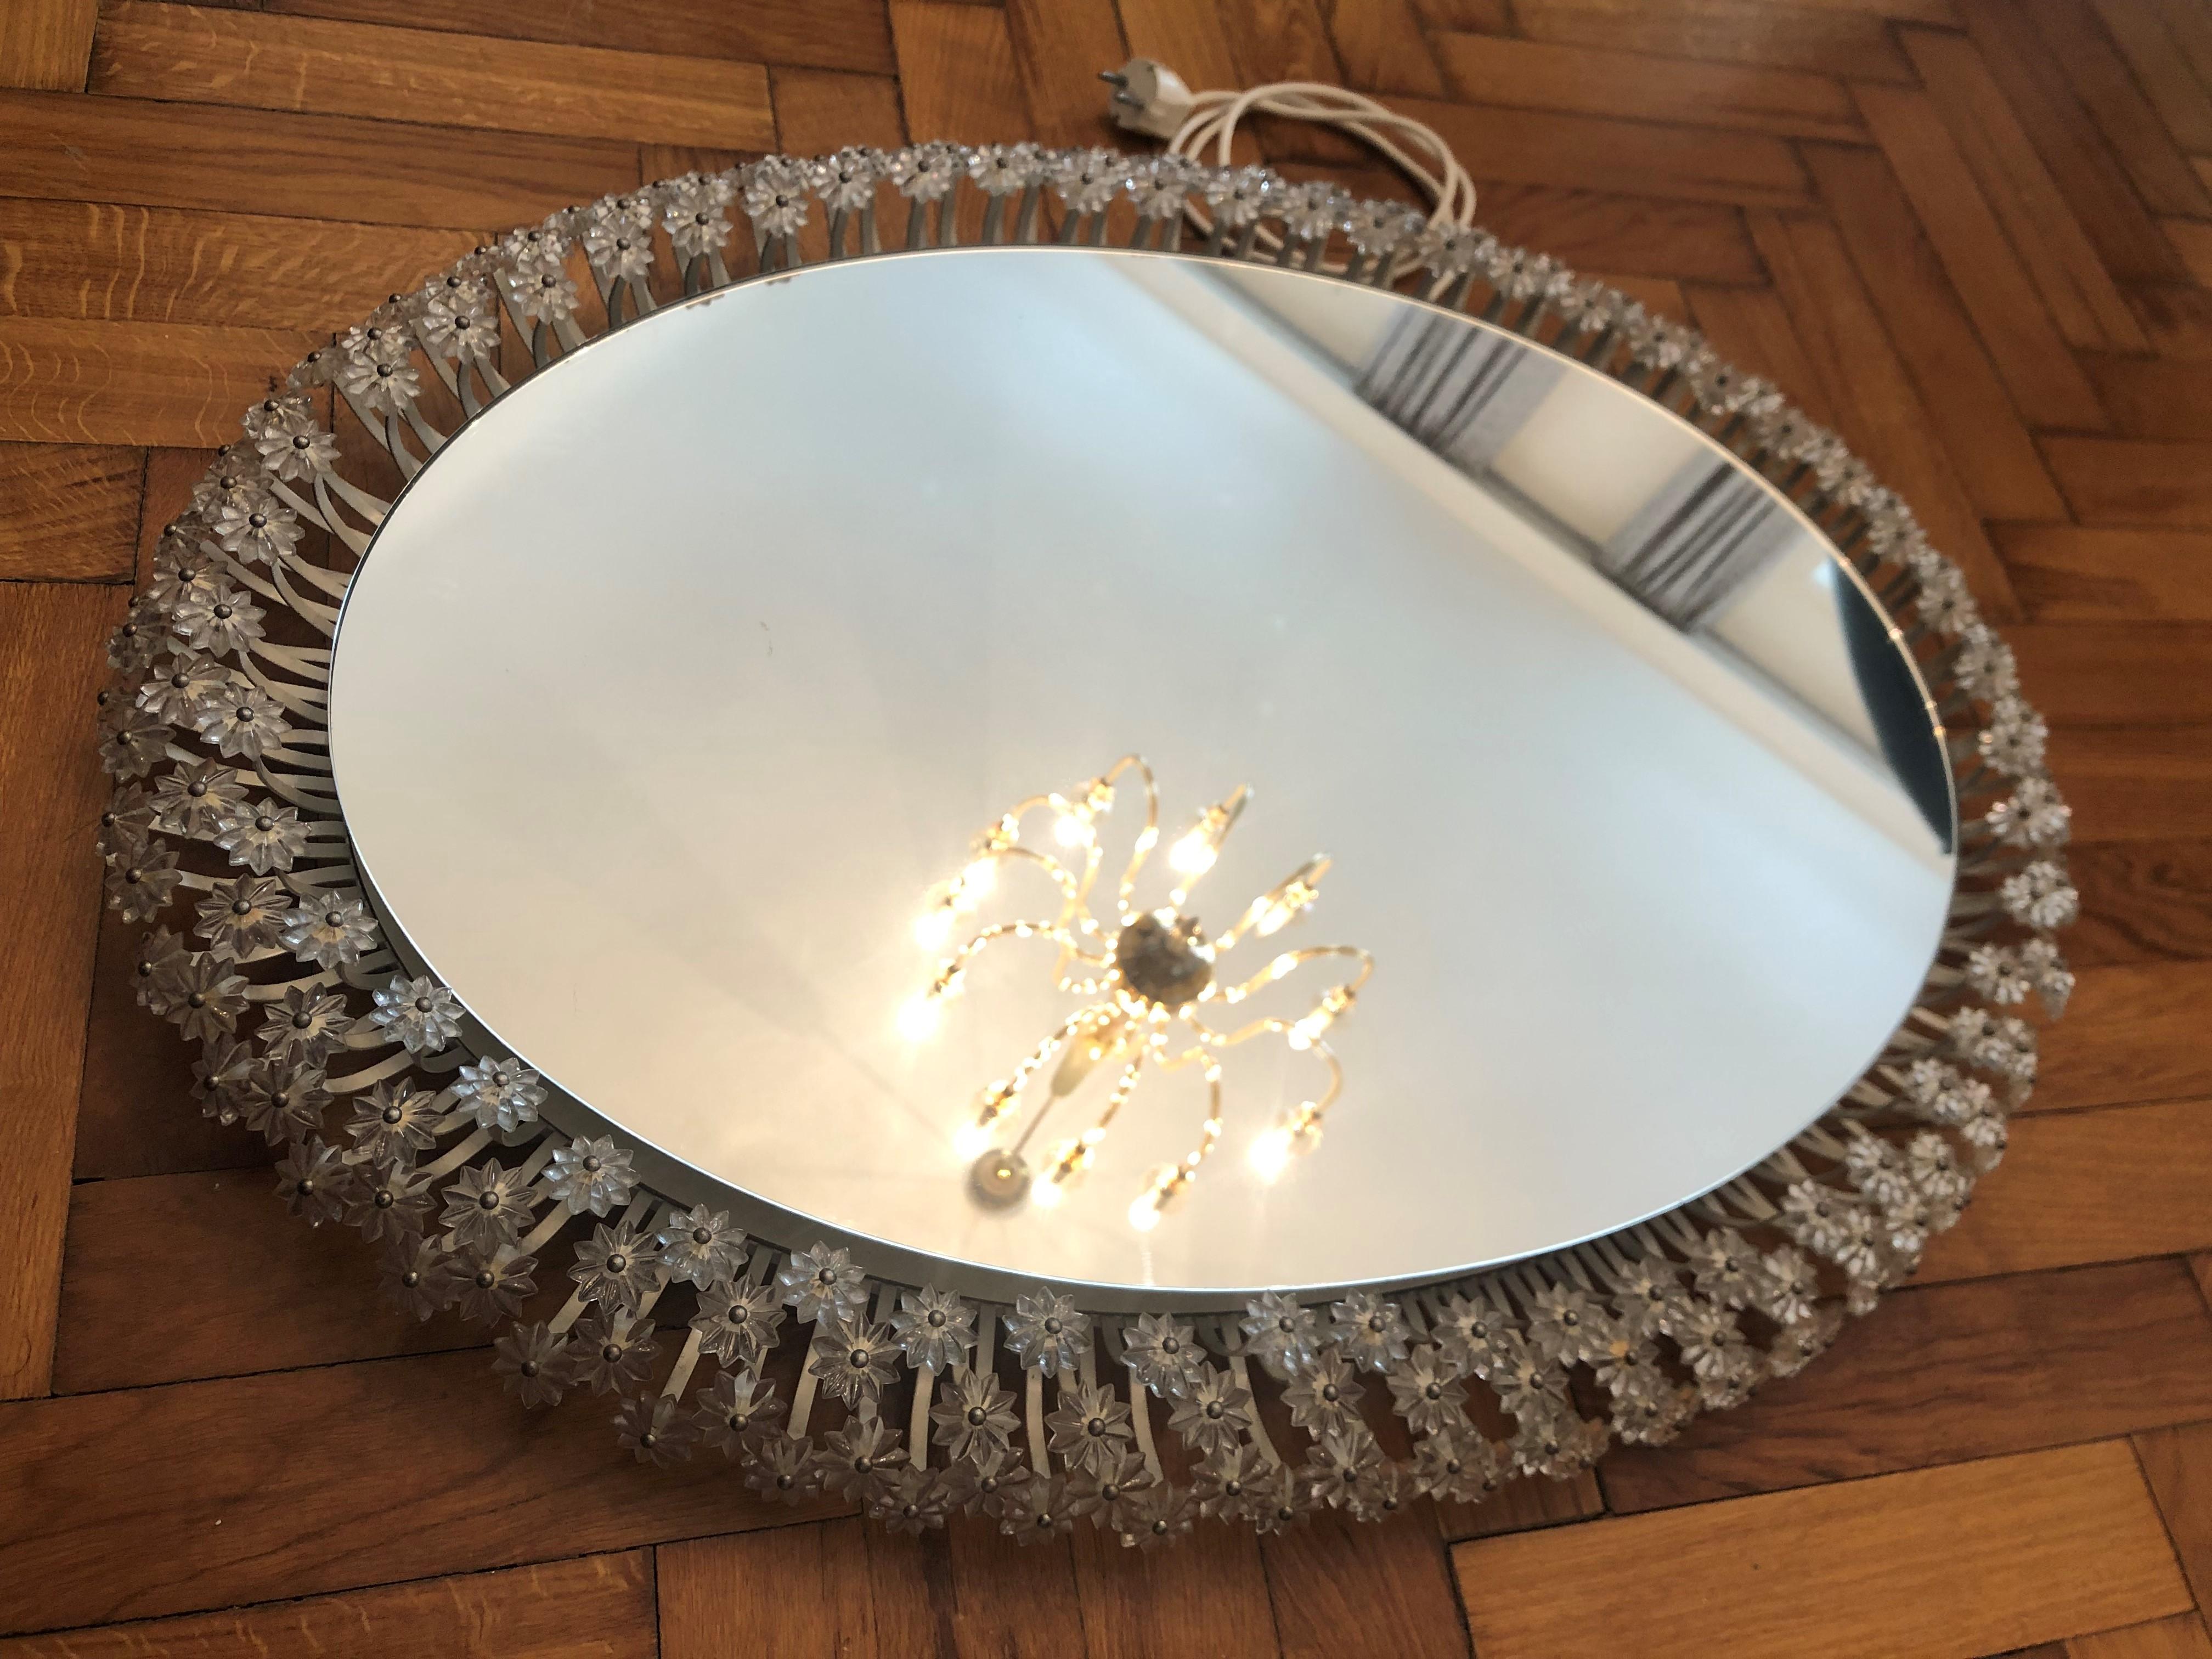 Mid-20th century illuminated oval wall mirror by German manufacturer Palwa. 
The mirror is framed with a border of 4 ranks of flowers and petals made from faceted real glass star shaped crystals and beads that sparkle in the light. 
The frame is